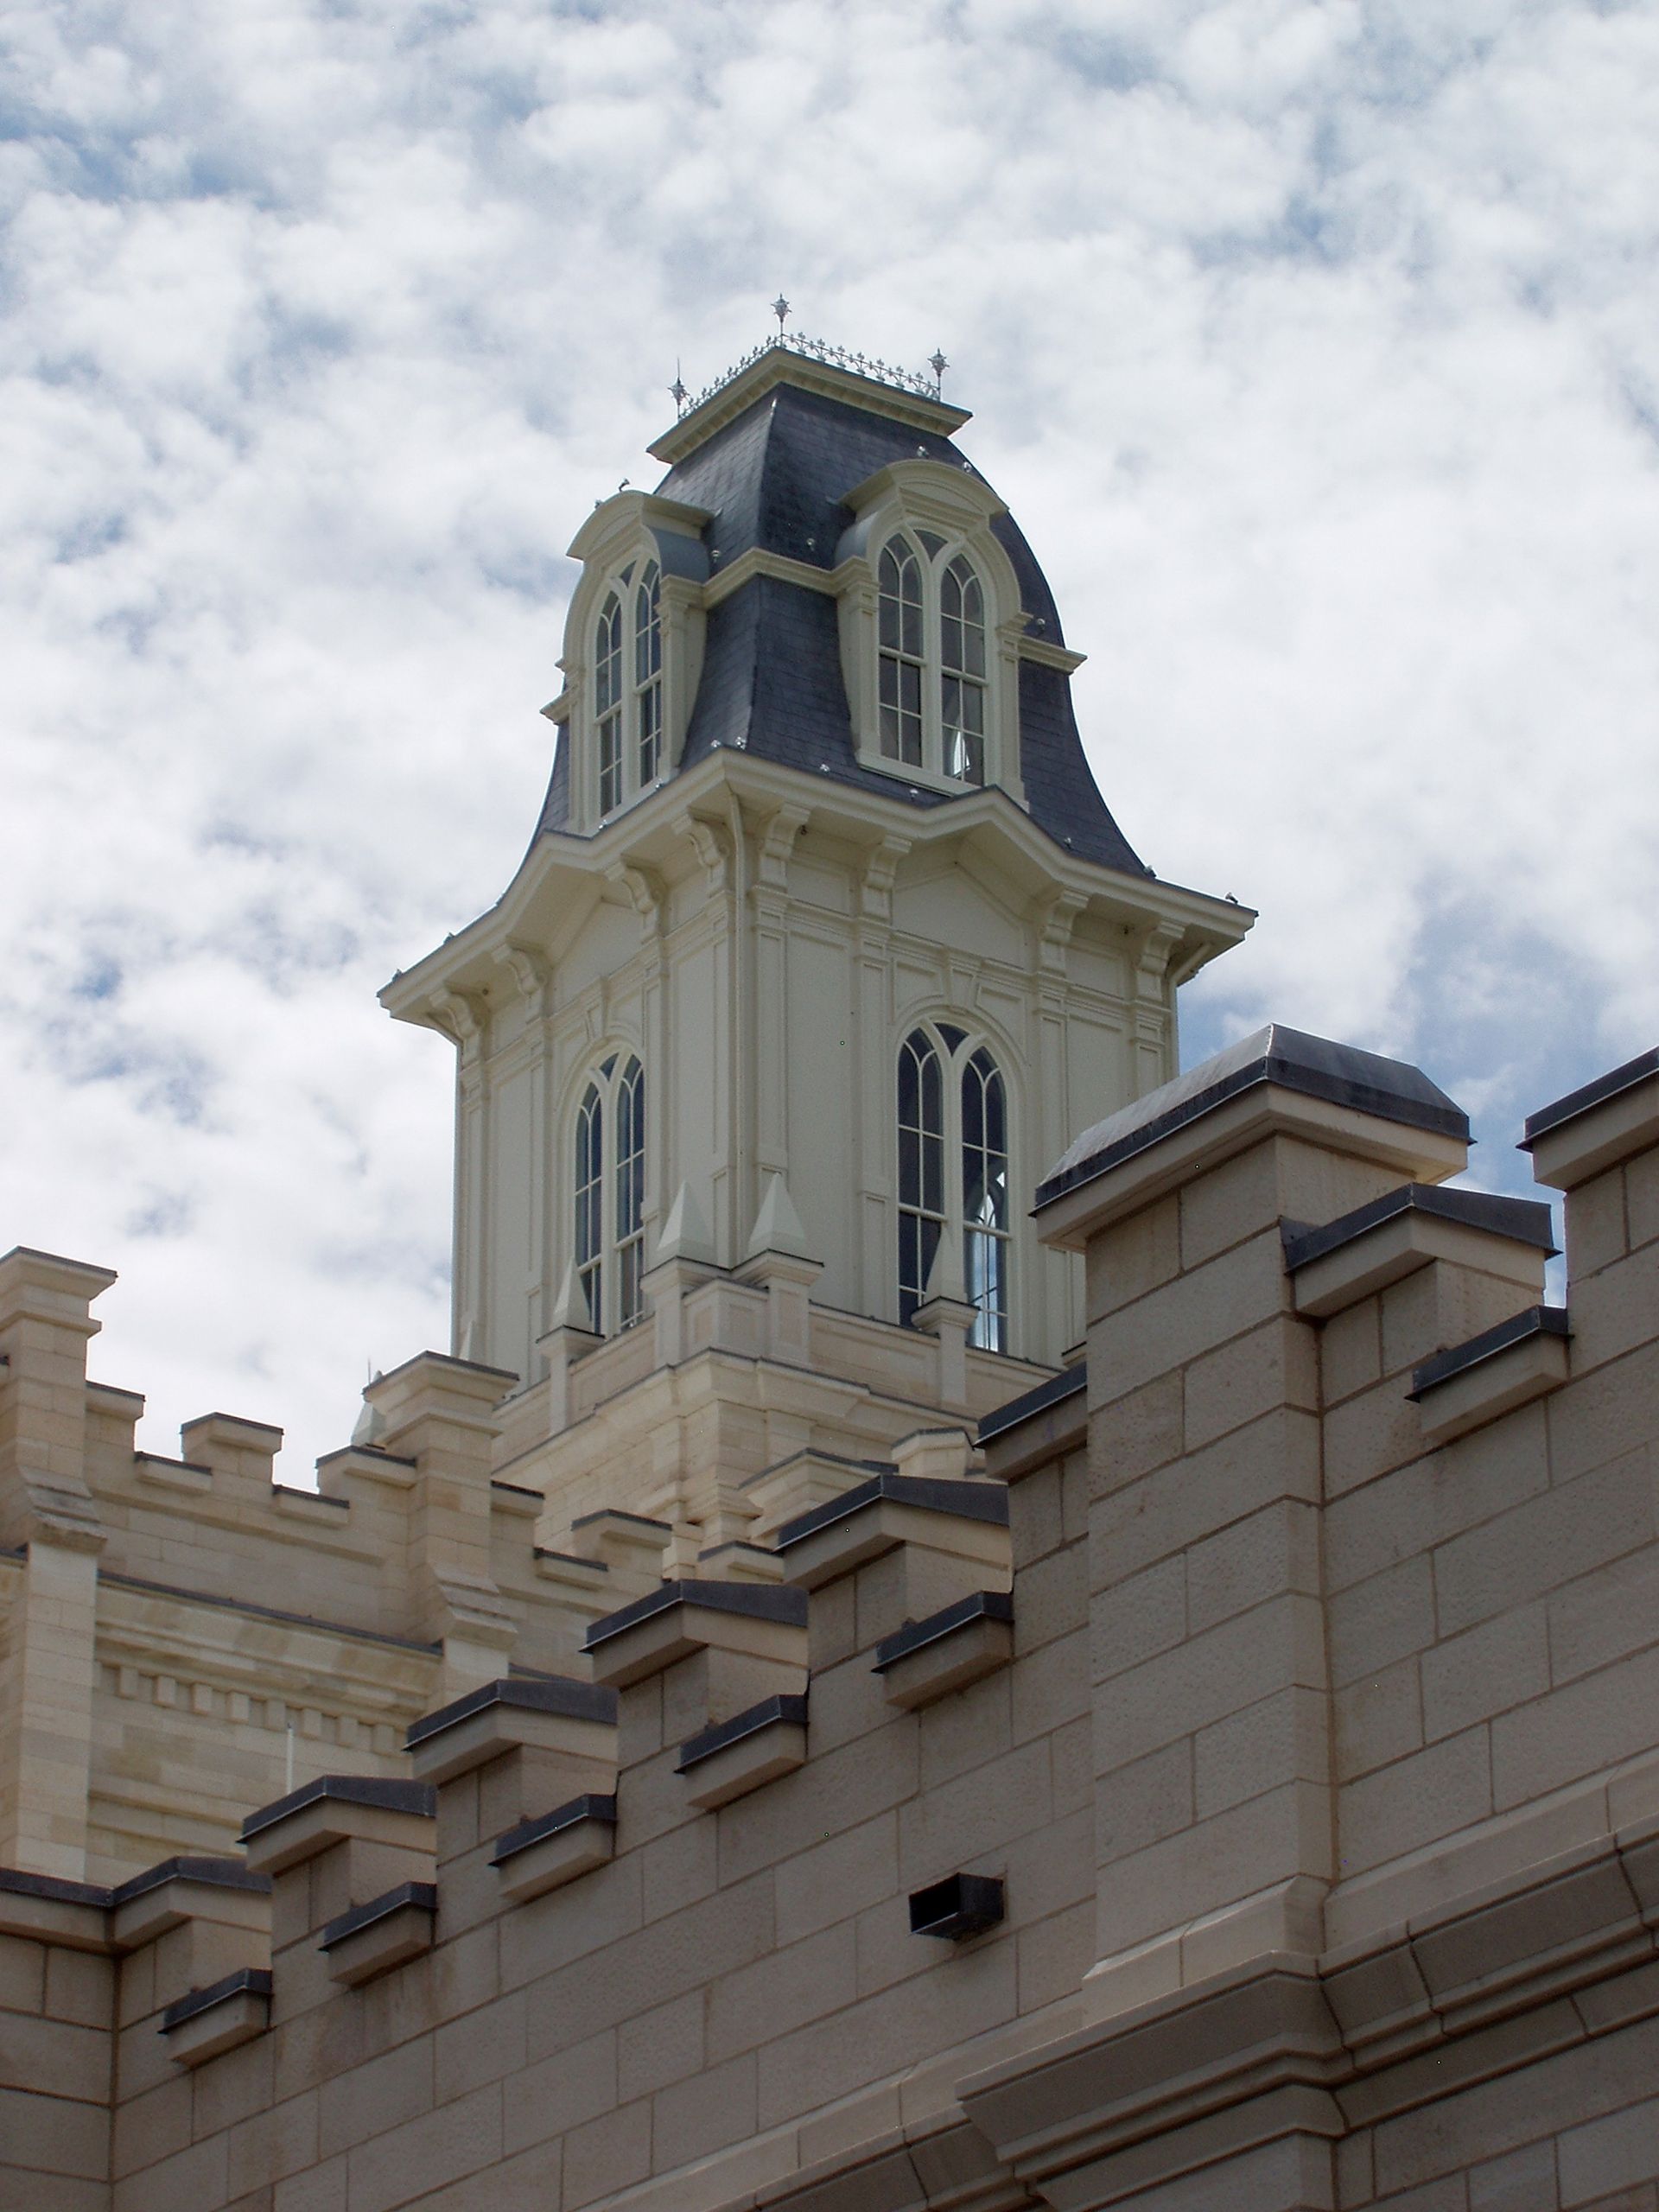 The Manti Utah Temple spire, including the exterior of the temple.